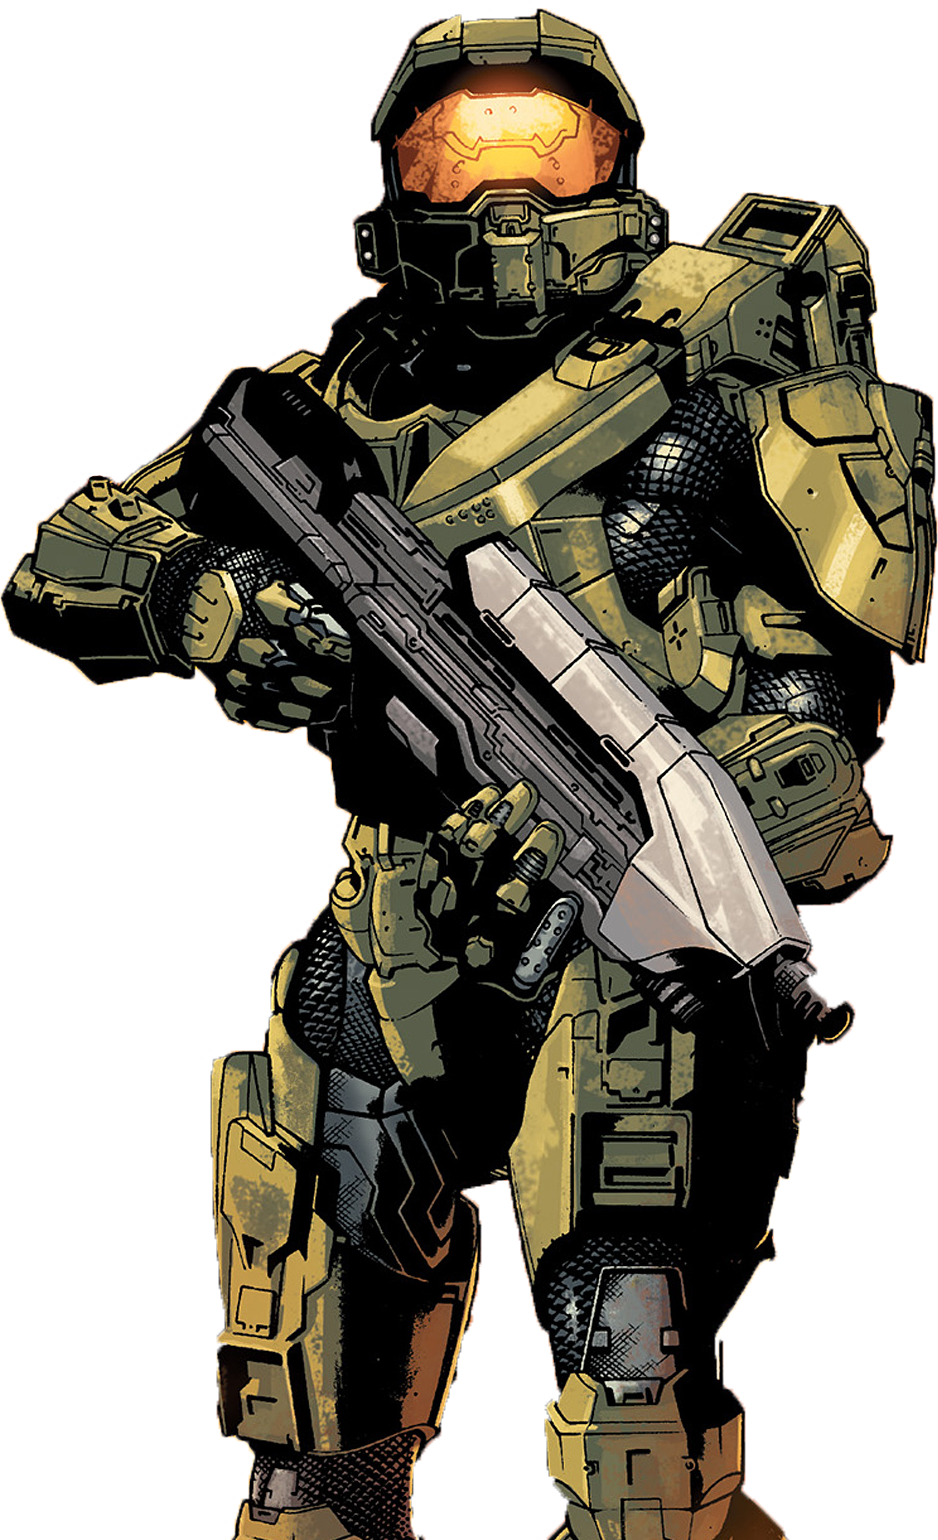 Glowing Halo Transparent PNG 